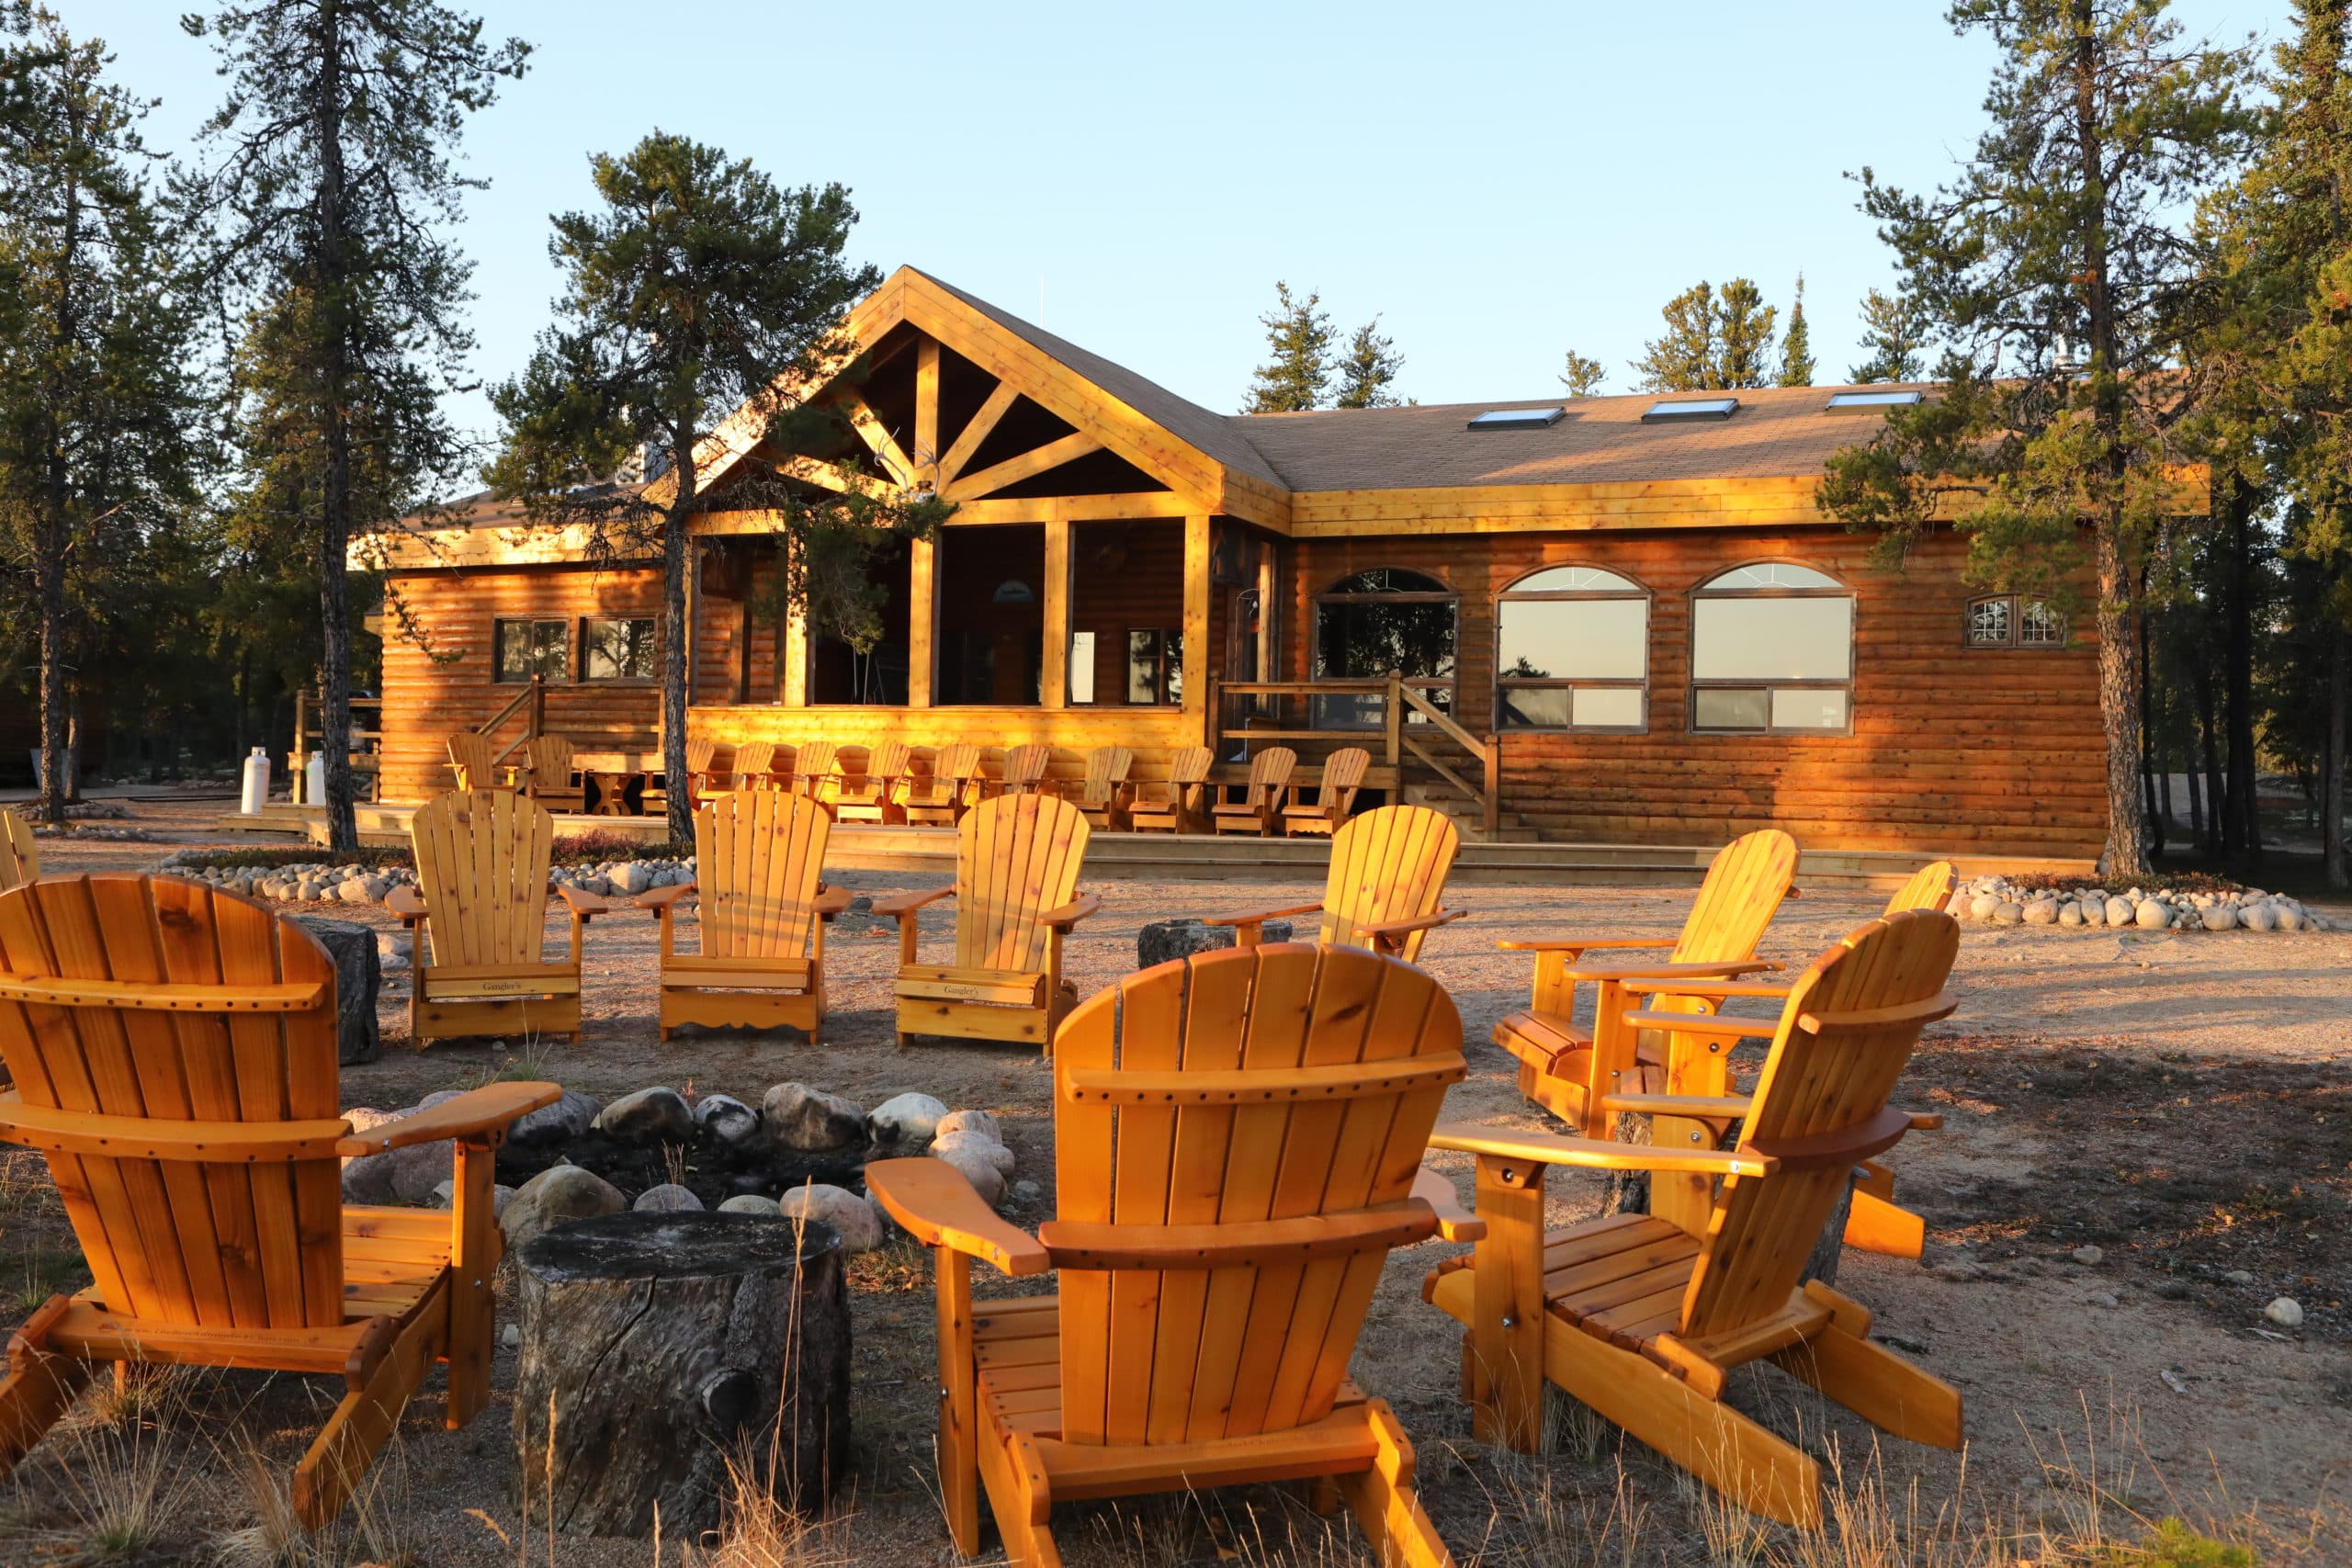 landscape image of a campfire circle with lounging chairs and a main wooden lodge in the background